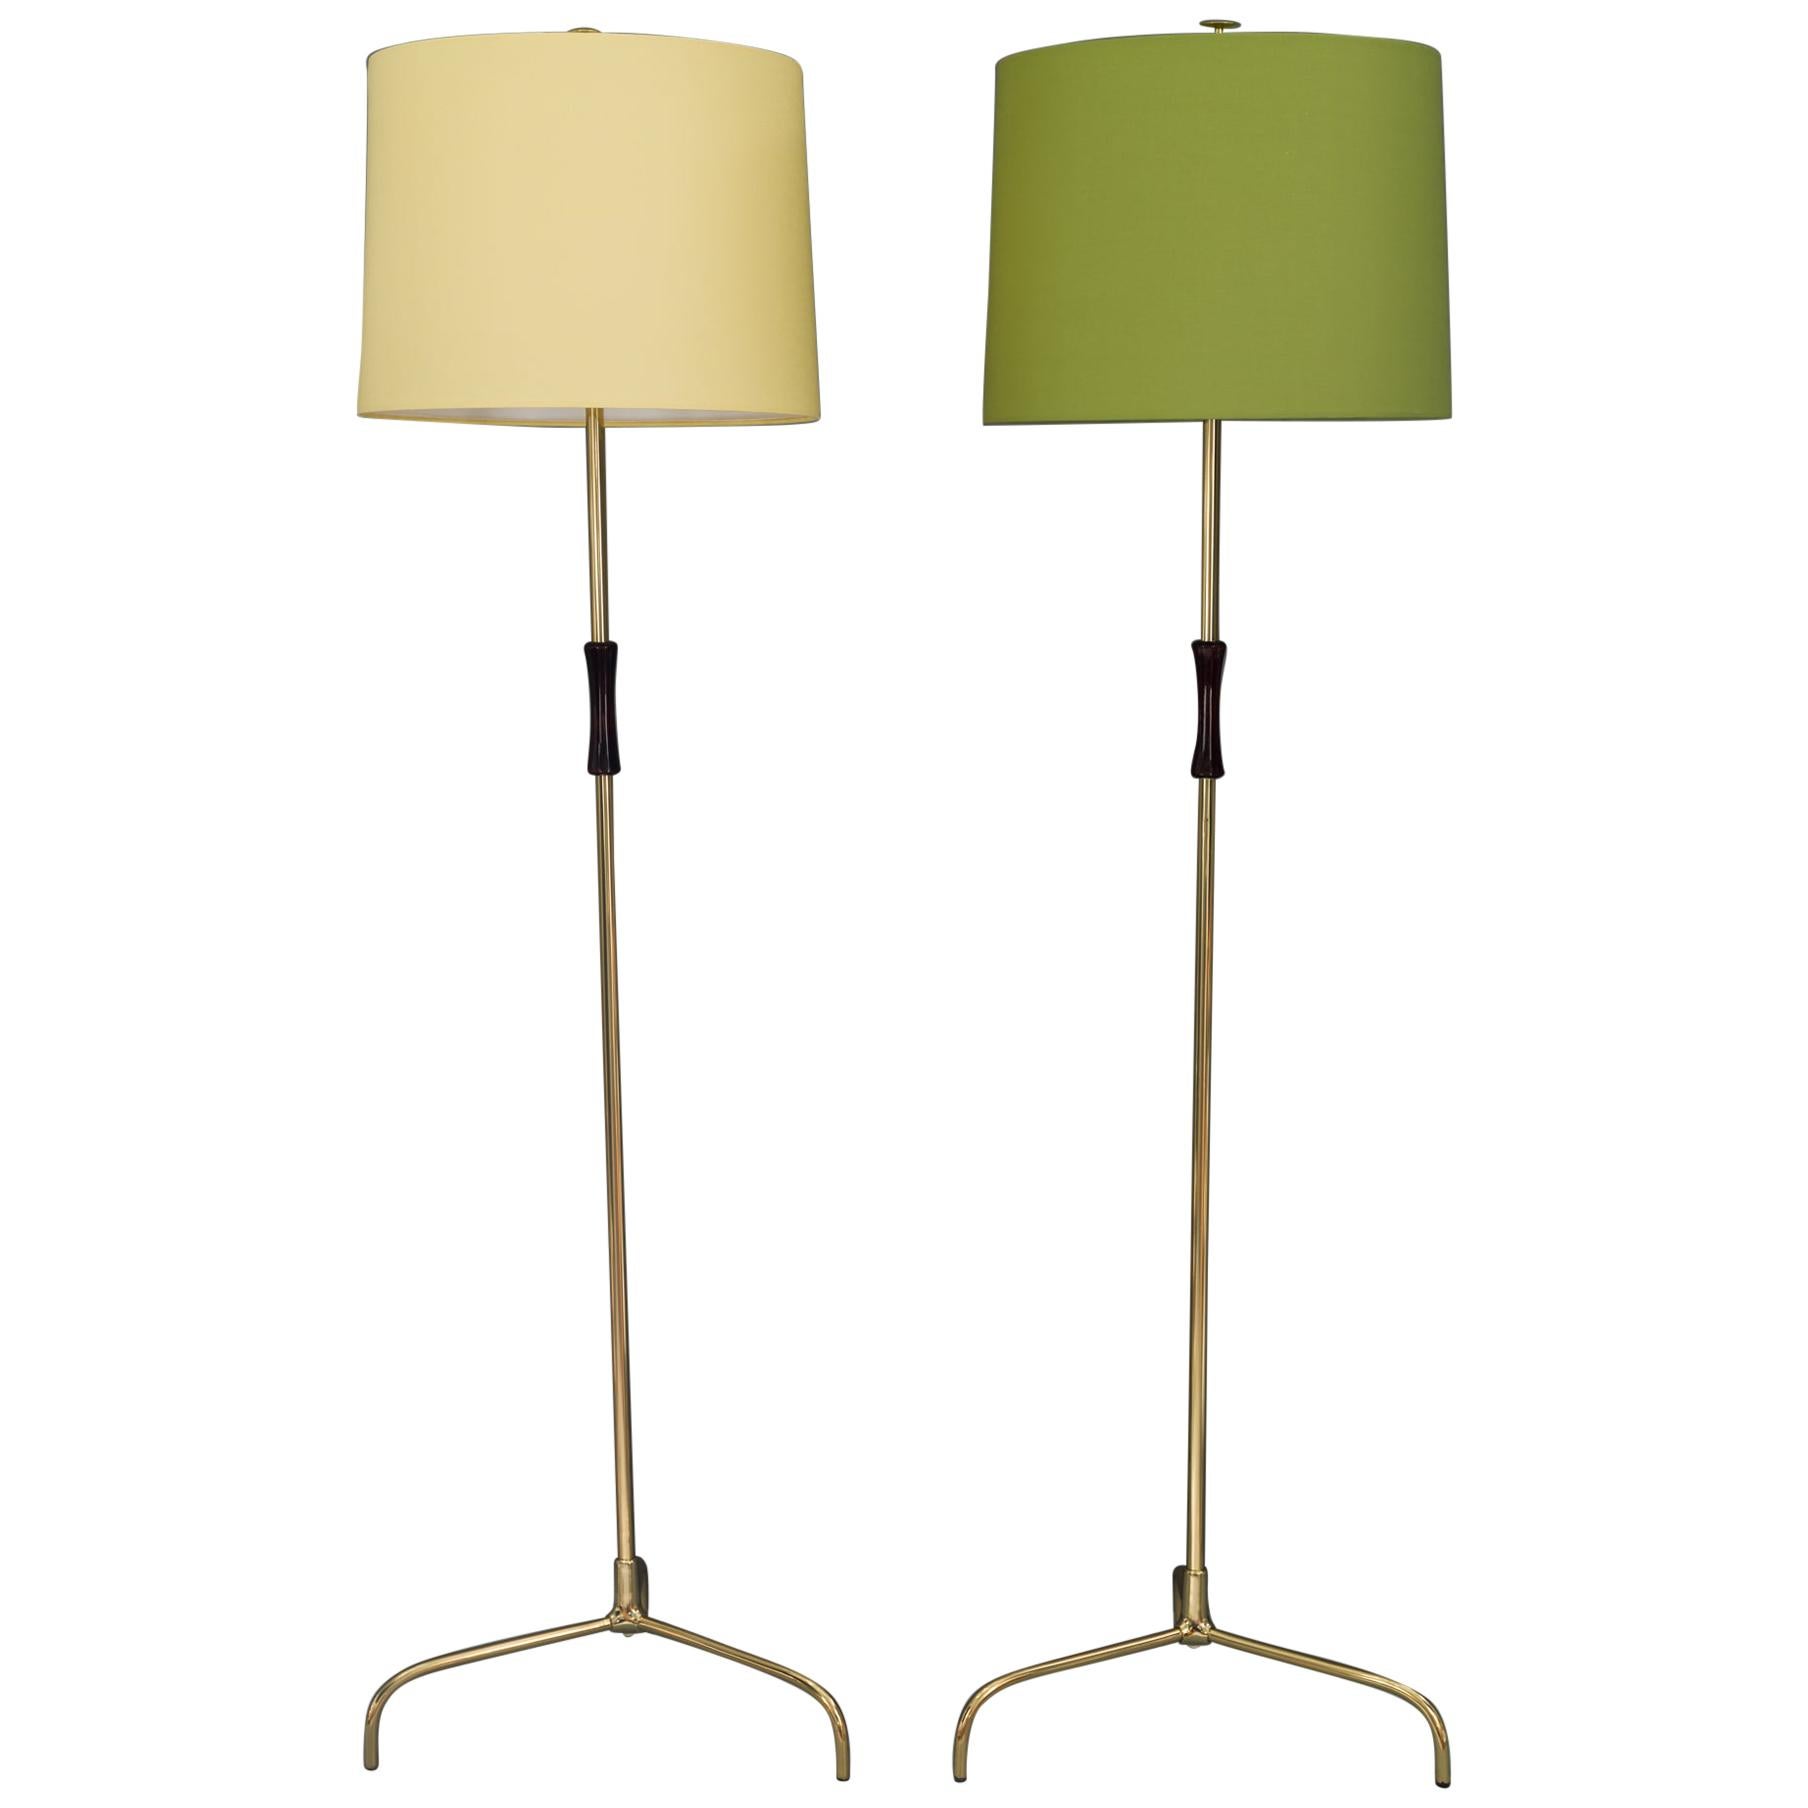 Two Rupert Nikoll Floor Lamps, circa 1950s For Sale